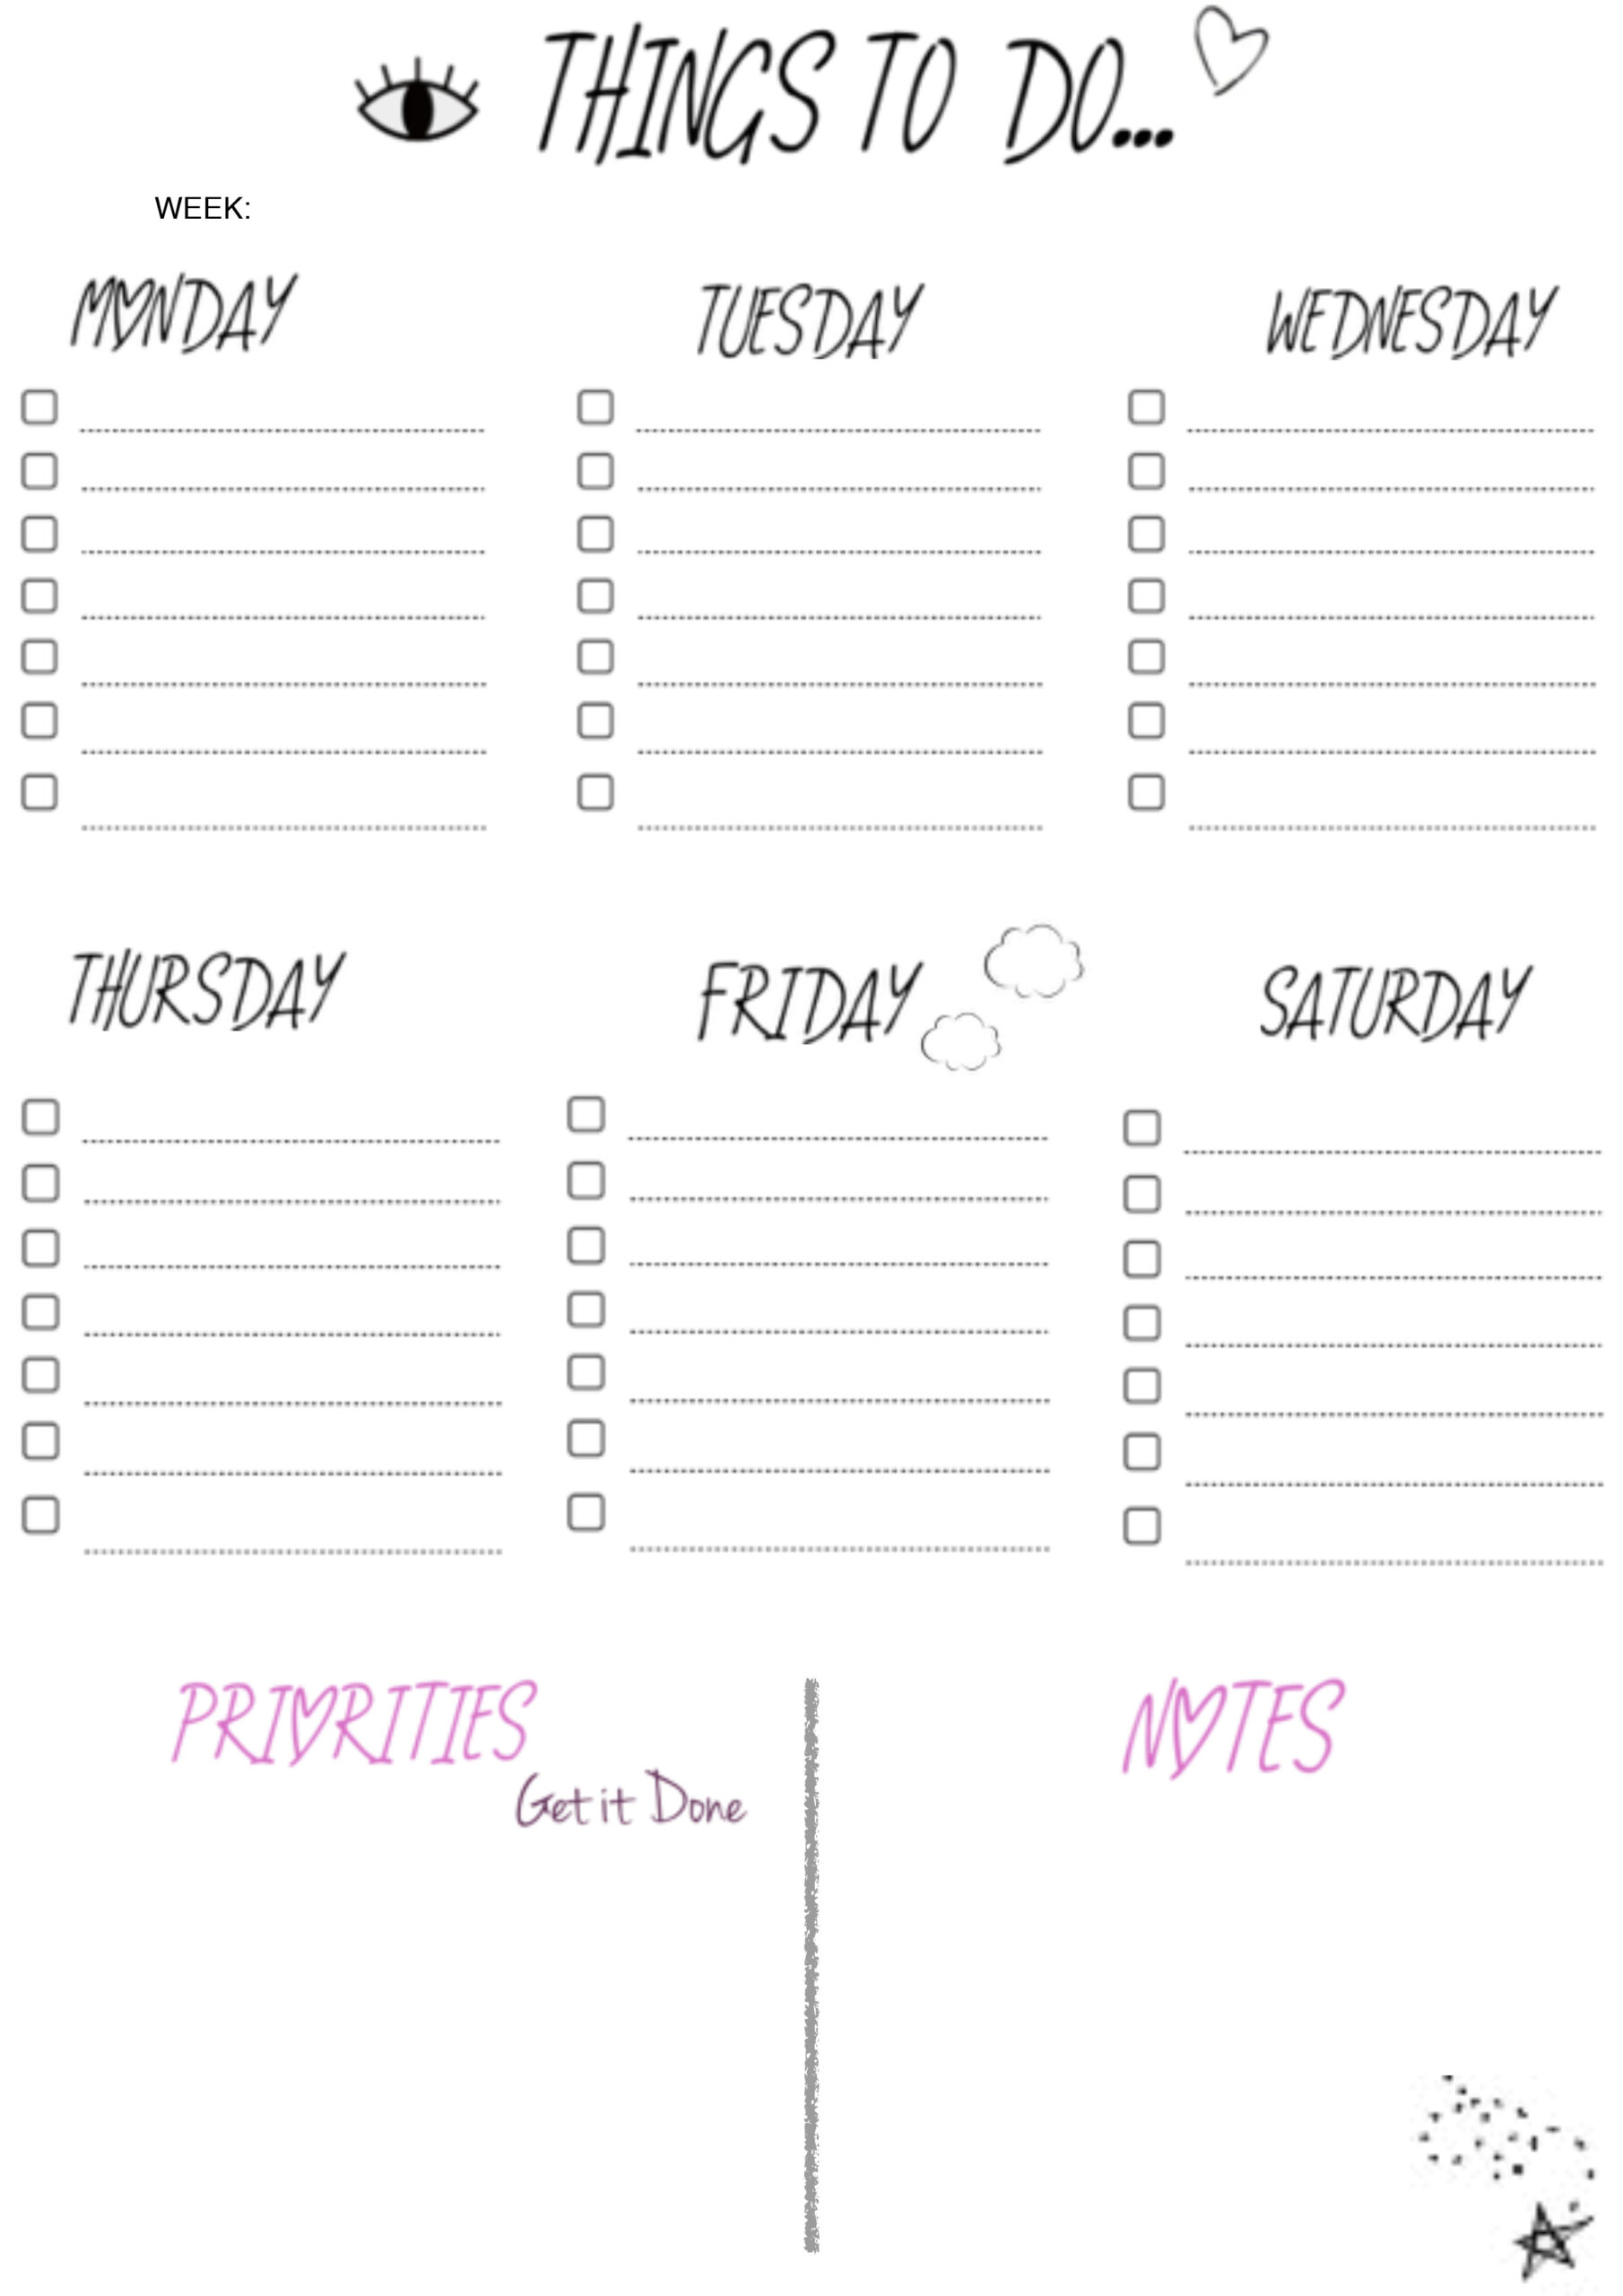 List To Do During The Week